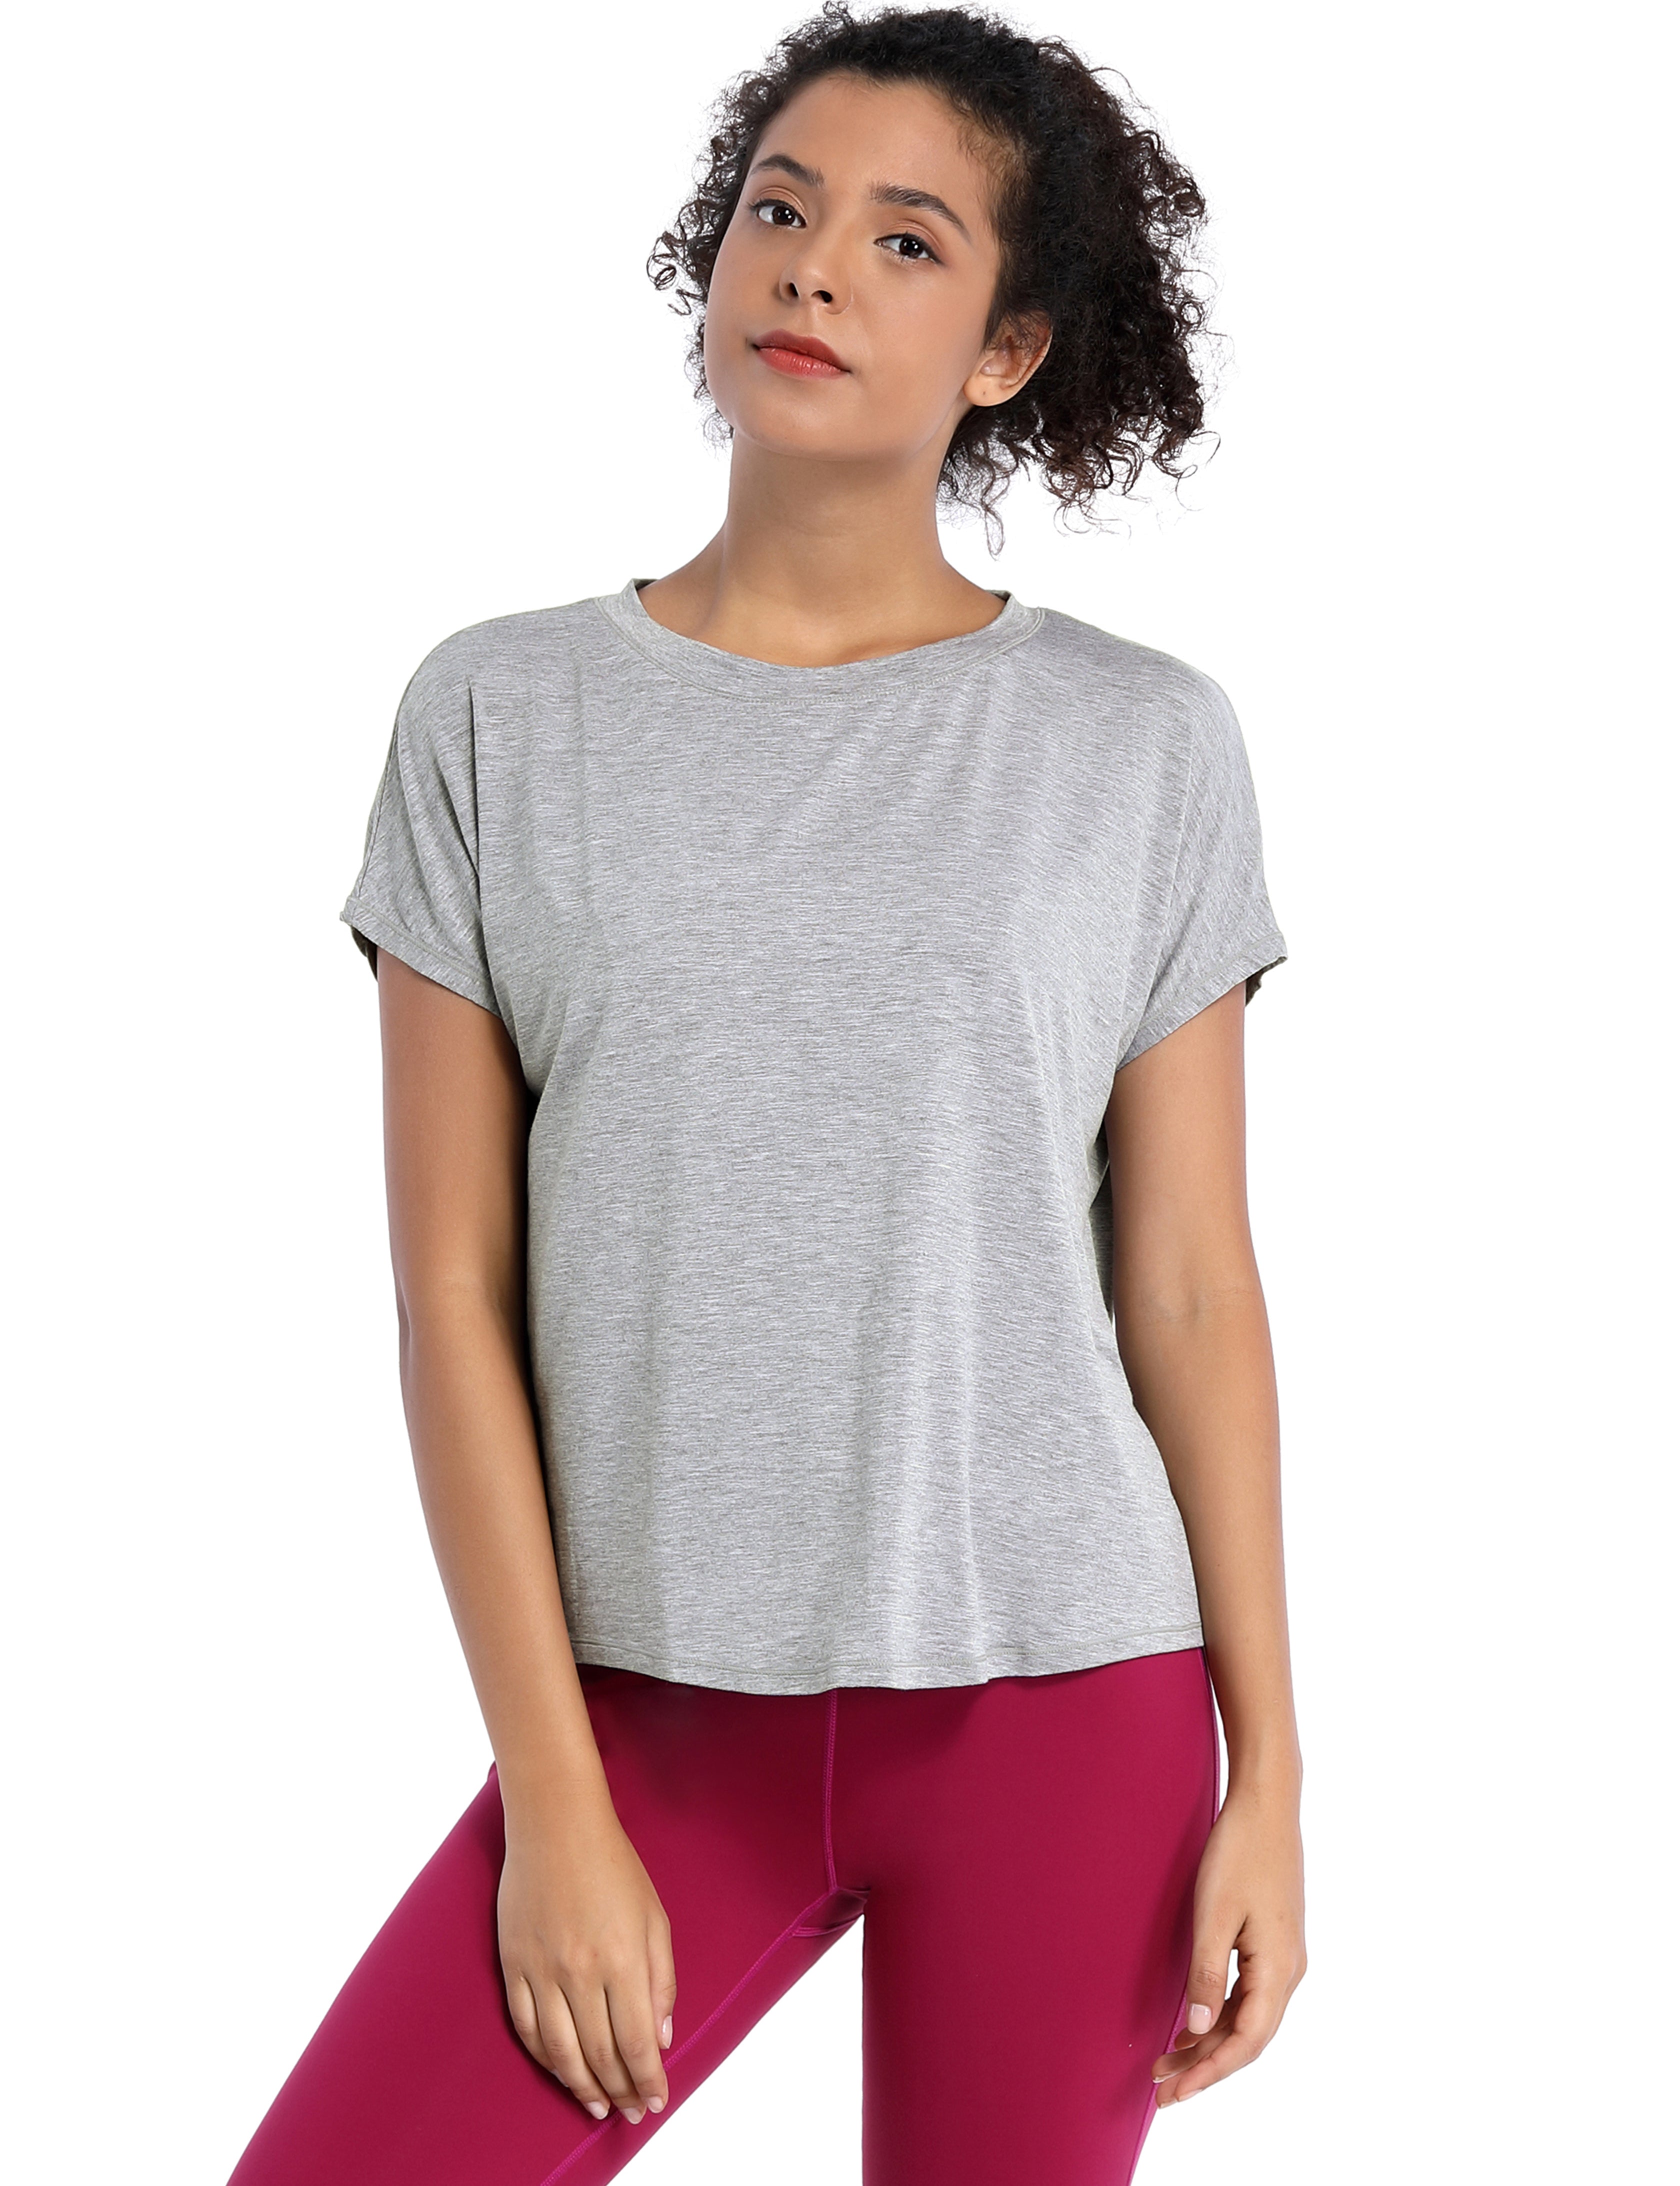 Hip Length Short Sleeve Shirt heathergray 93%Modal/7%Spandex Designed for Pilates Classic Fit, Hip Length An easy fit that floats away from your body Sits below the waistband for moderate, everyday coverage Lightweight, elastic, strong fabric for moisture absorption and perspiration, sports and fitness clothing.